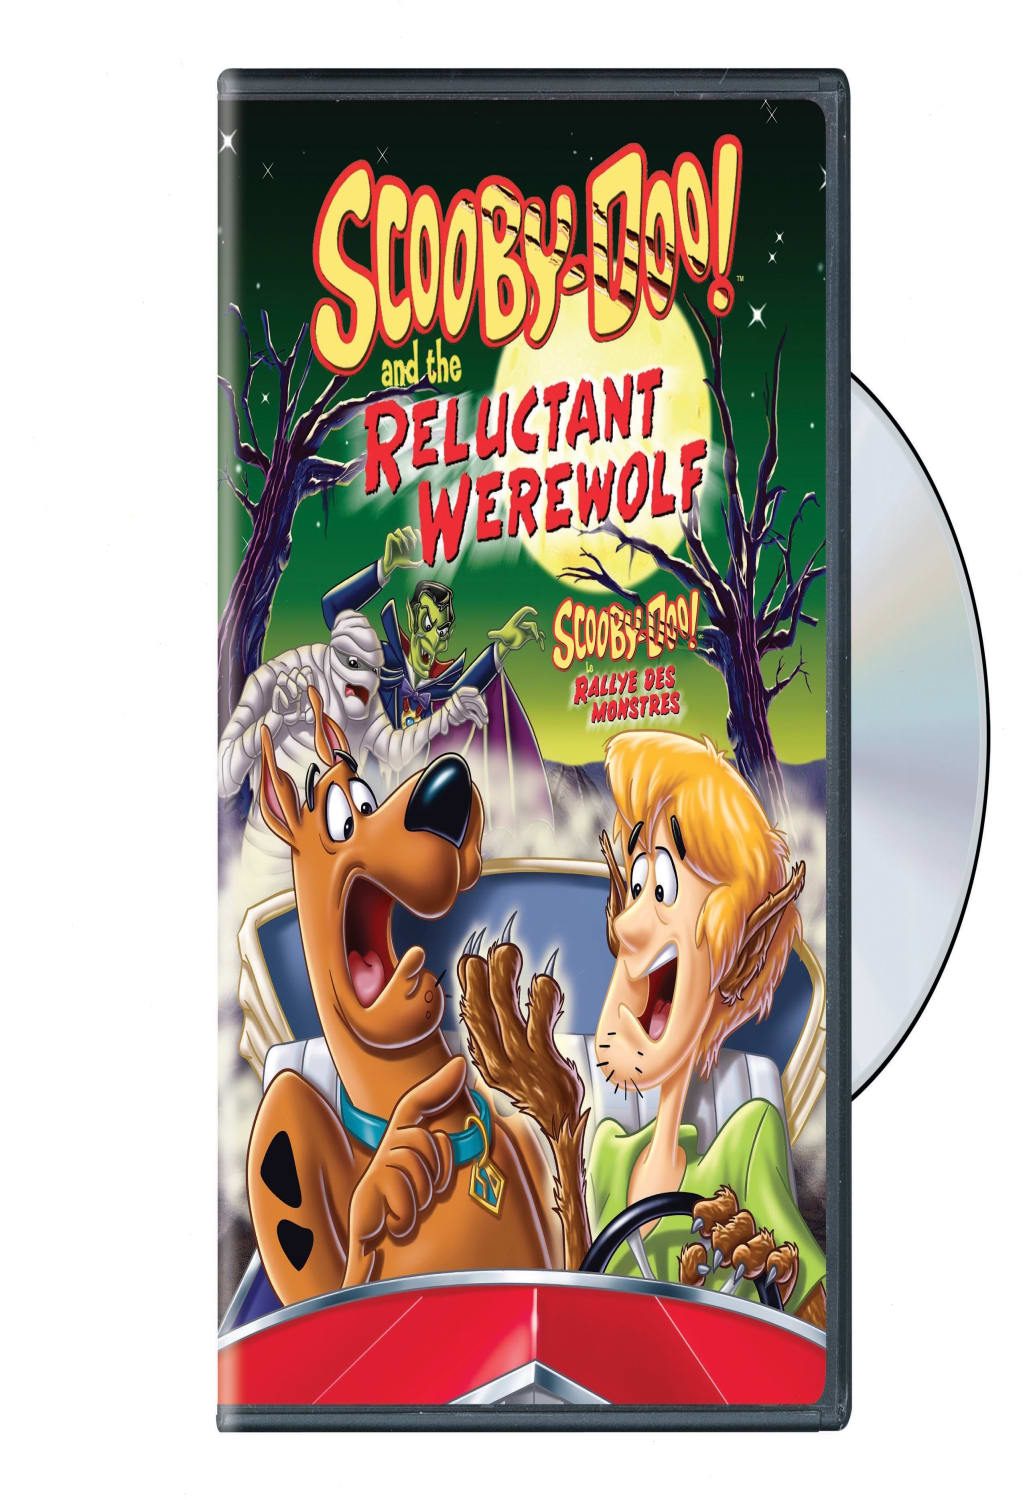 Scooby-Doo! and the Reluctant Werewolf (DVD) on MovieShack